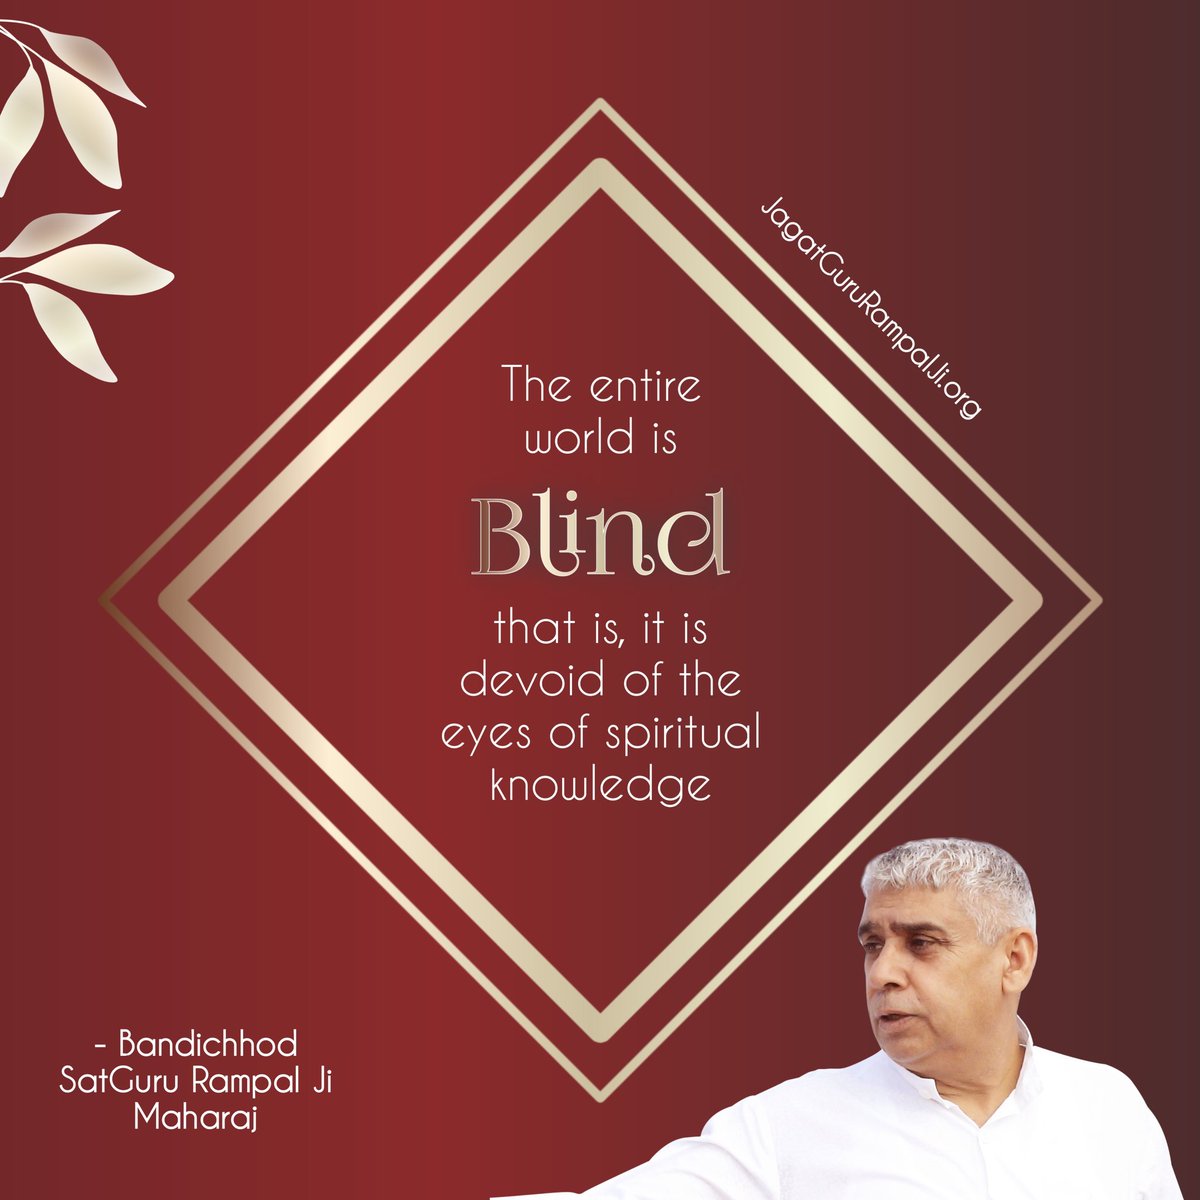 #GodMorningMonday
The entire world is
Blind
that is, it is devoid of the
eyes of spiritual knowledge.
~ Bandichhod SatGuru Rampal Ji Maharaj
Must Watch Sadhna tv7:30 PM
Visit our Satlok Ashram YouTube Channel for More Information
#mondaythoughts